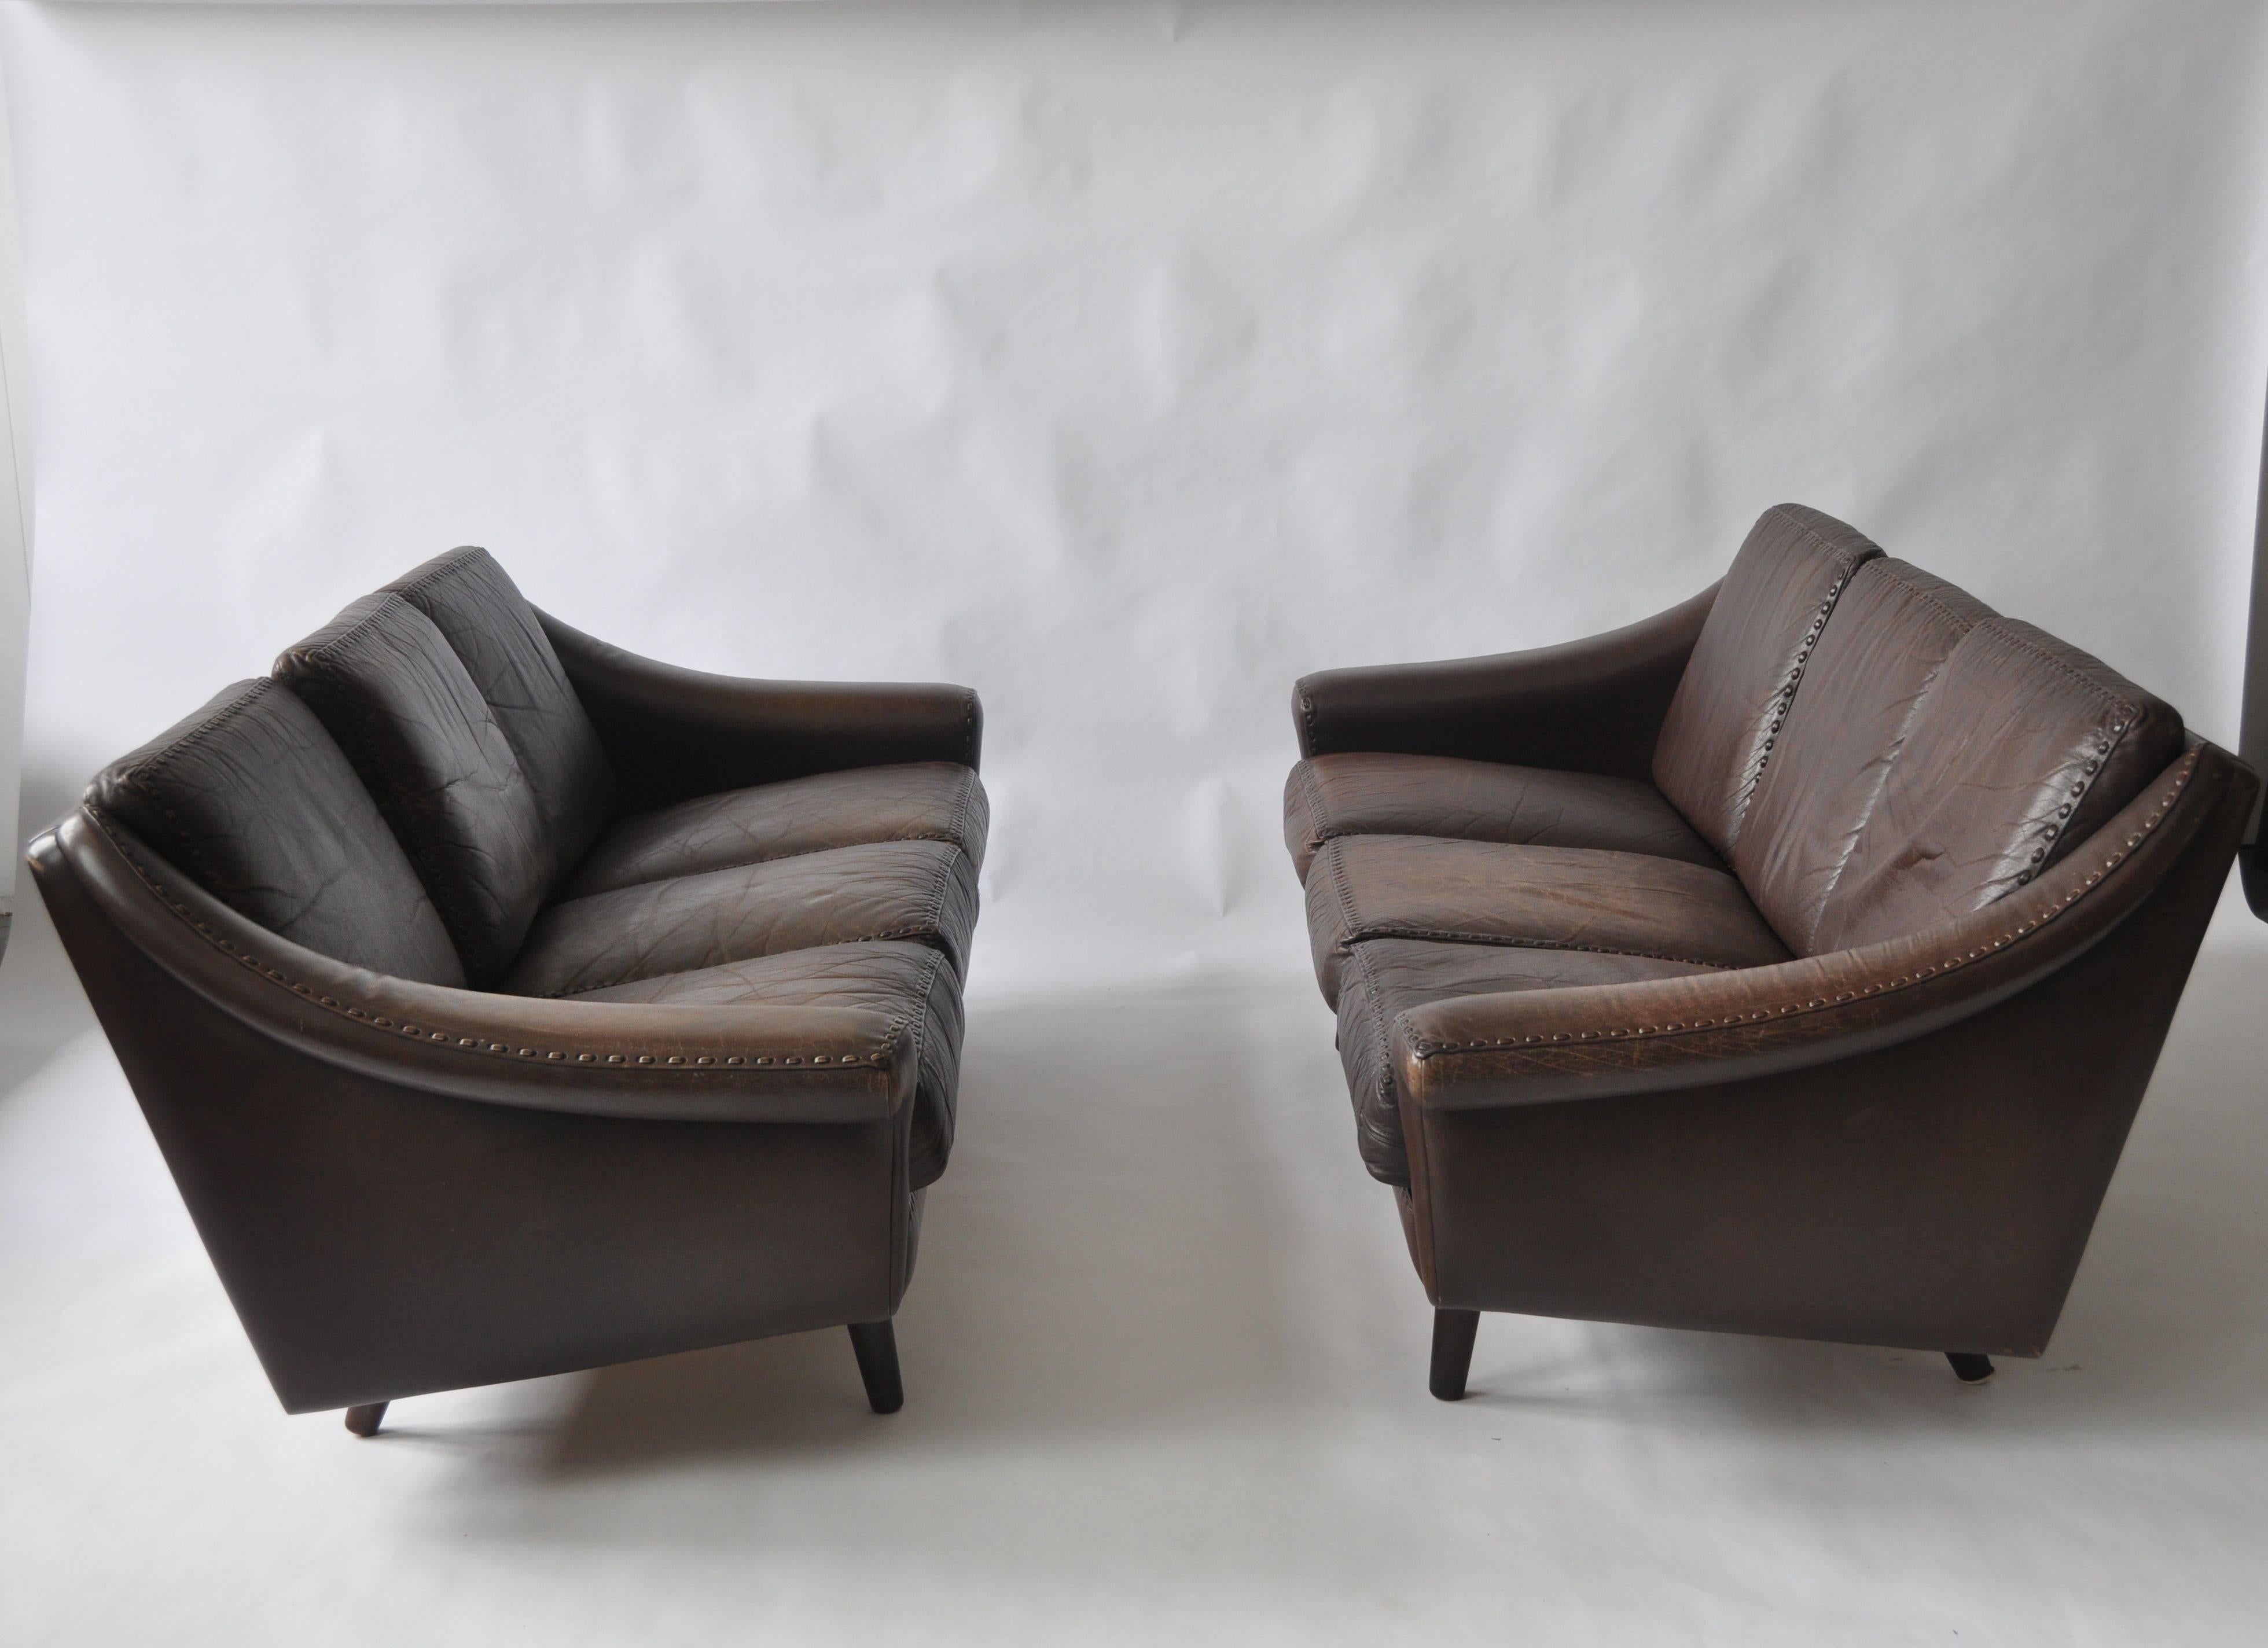 Pair of Aage Christiansen 1960s Danish leather sofas. 
Produced by Eran Mobler. 

Price is for the pair but can be sold individually.